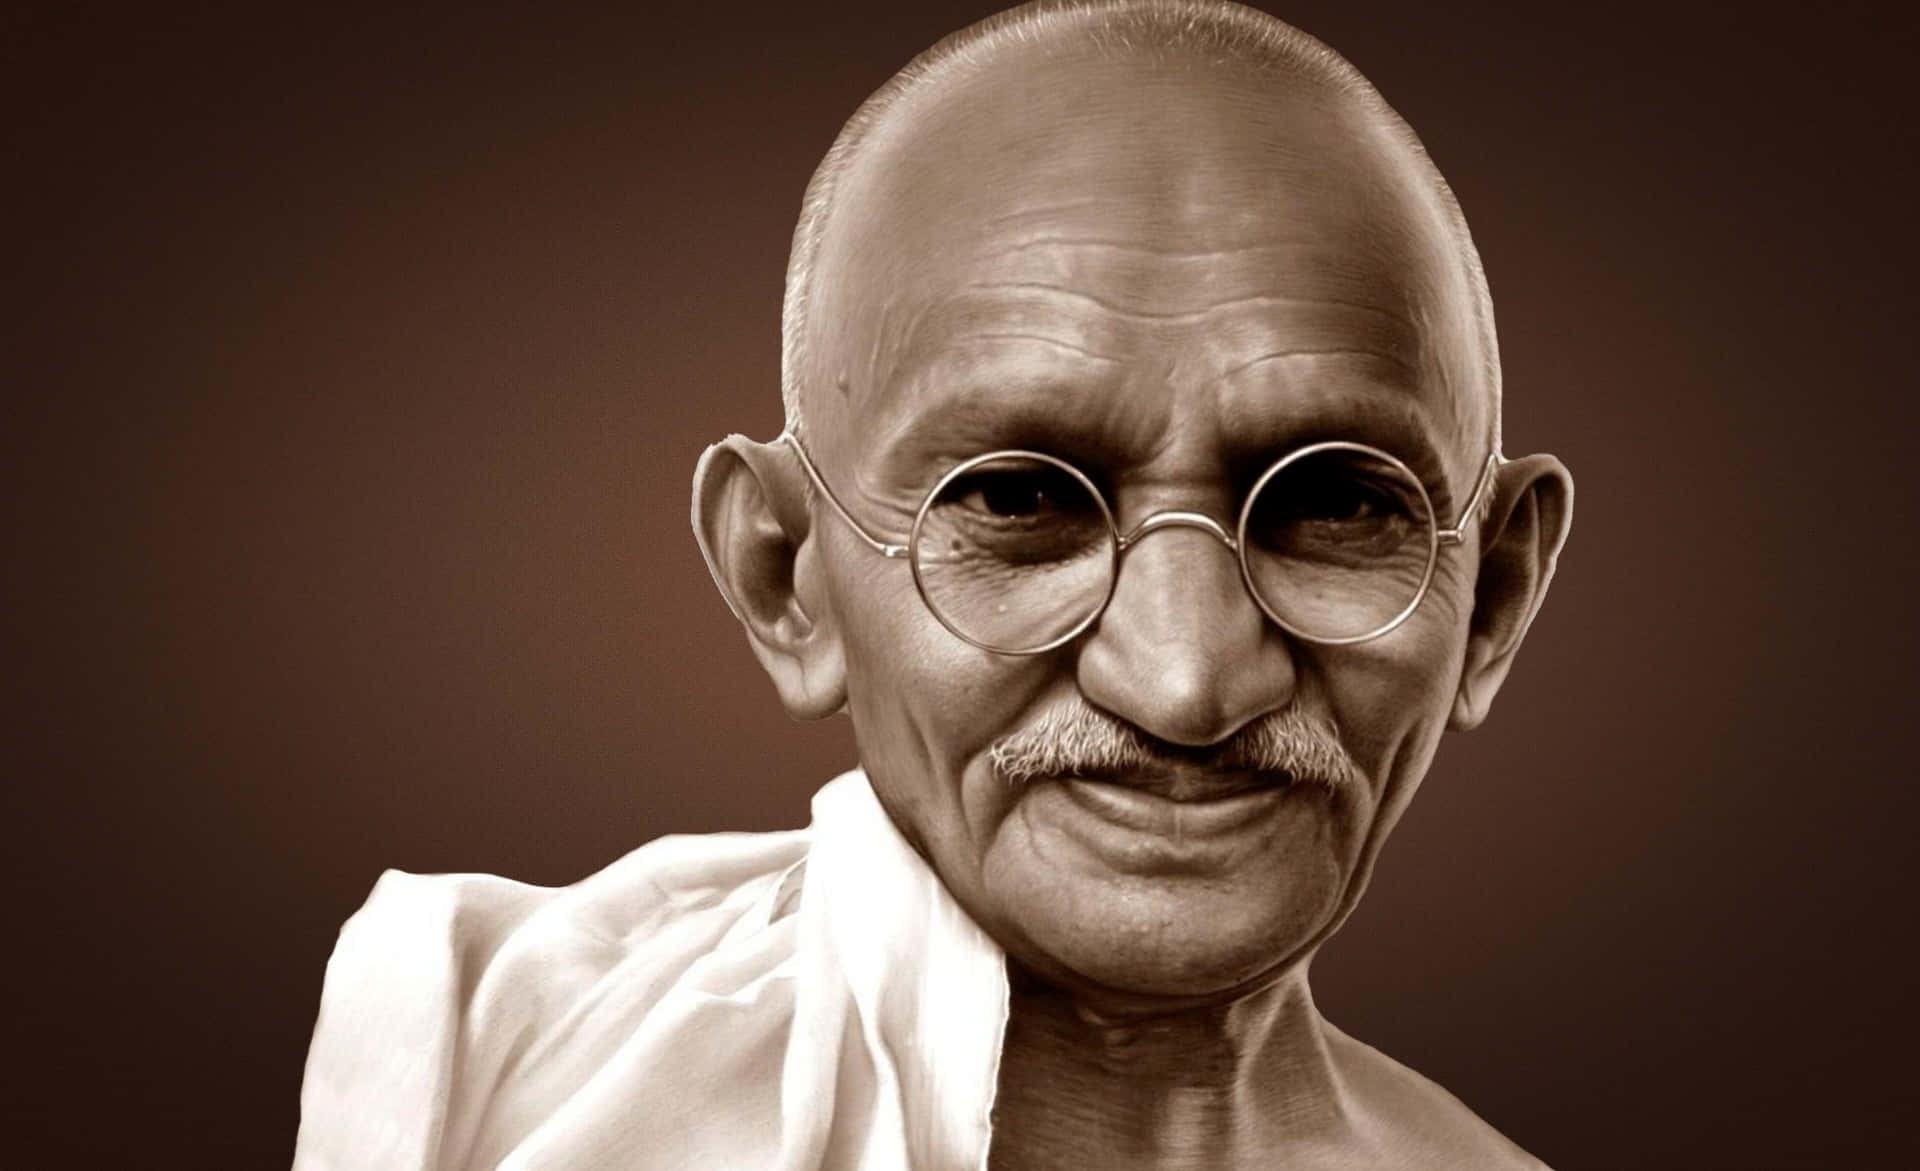 "Unshakable determination for truth and justice" - Mahatma Gandhi